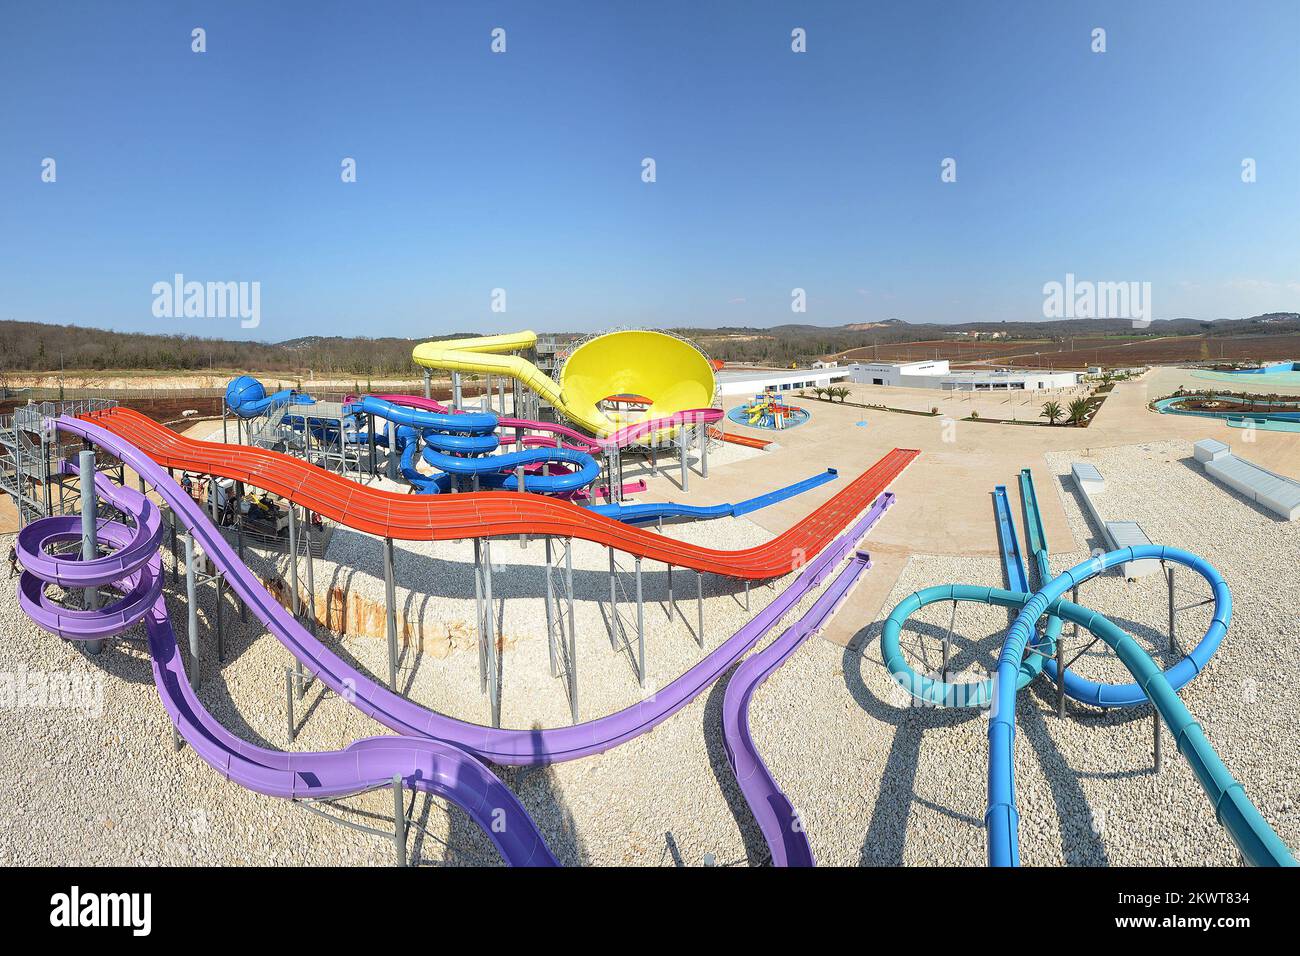 19.03.2015., Croatia, Porec - 6 May 2015 opens a water park Aquacolors in Porec, which is located next to the Green Lagoon, close to the main road that leads from Porec to Funtana and Vrsar. This is a considerable foreign investment of 25 million euros. The investor is a company Asket which is a wholly-owned by Czech company Signum.   Stock Photo